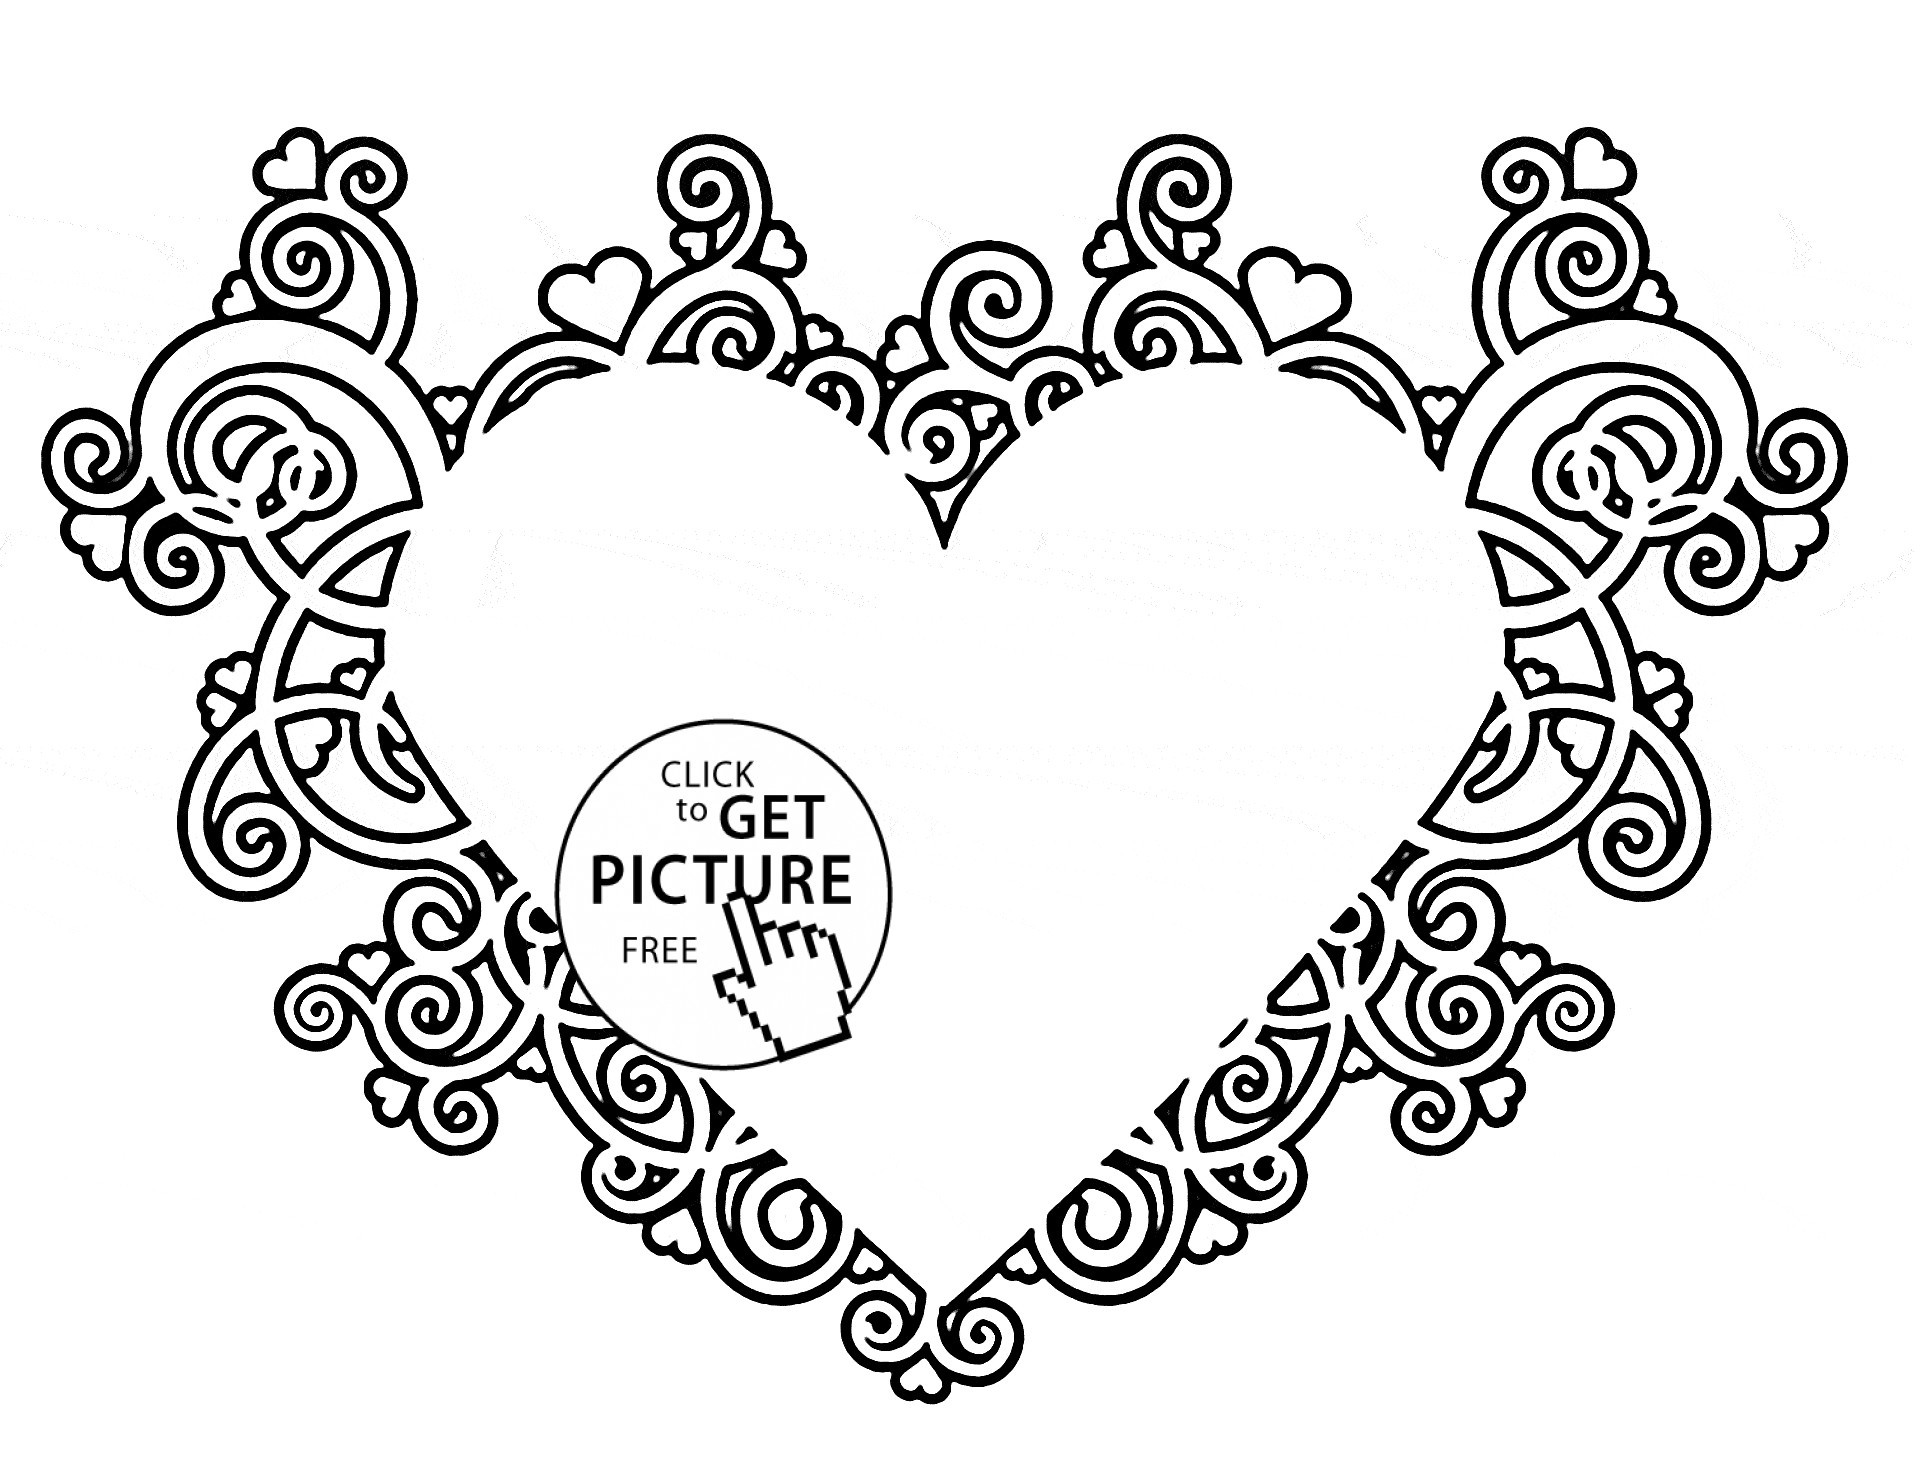 Heart Coloring Pages Pdf Best Of Heart Coloring Pages Pdf Jvzooreview